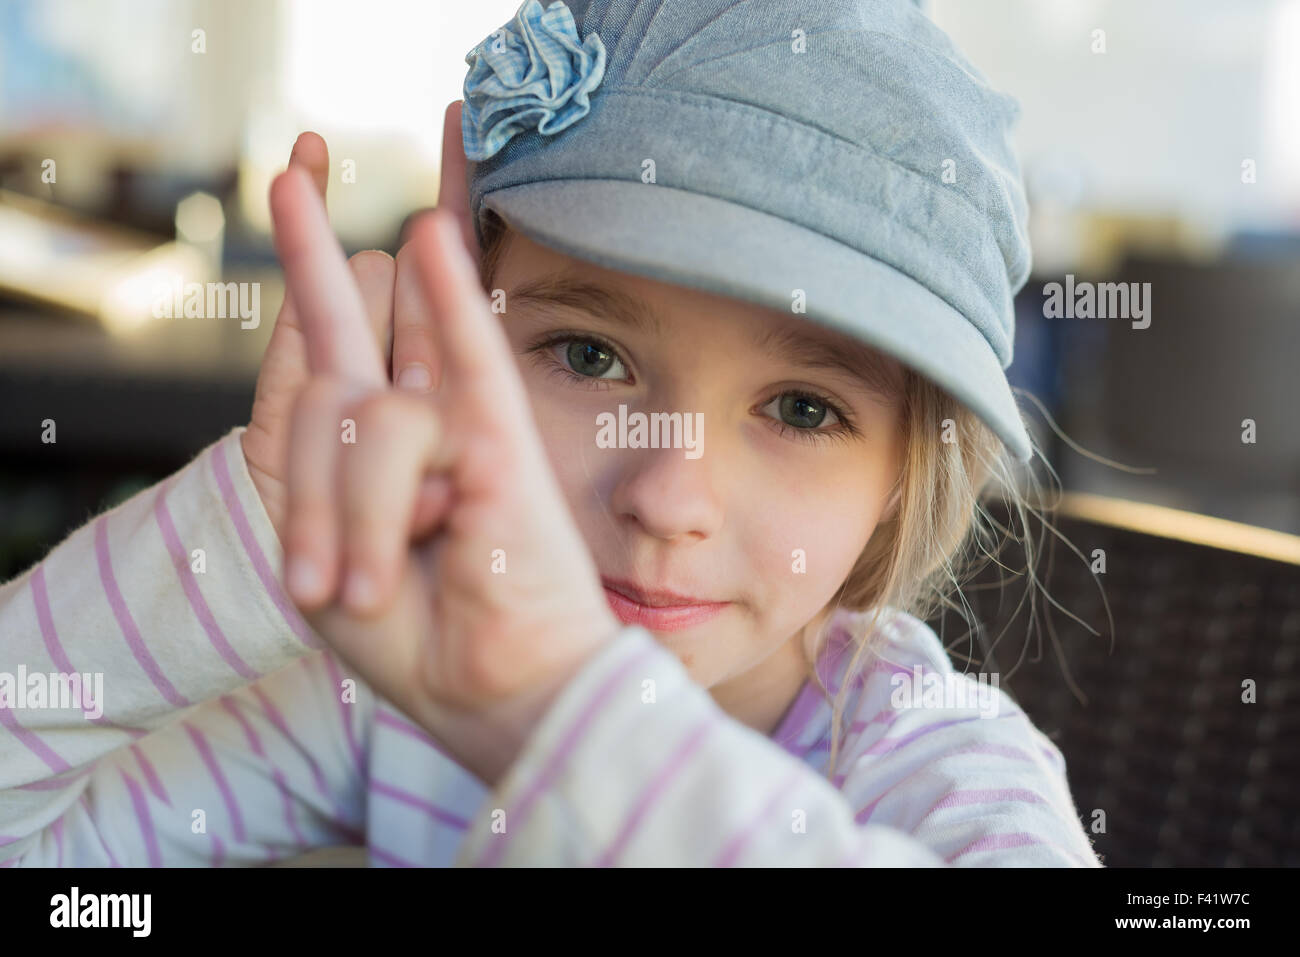 Cute girl showing horn signs Stock Photo